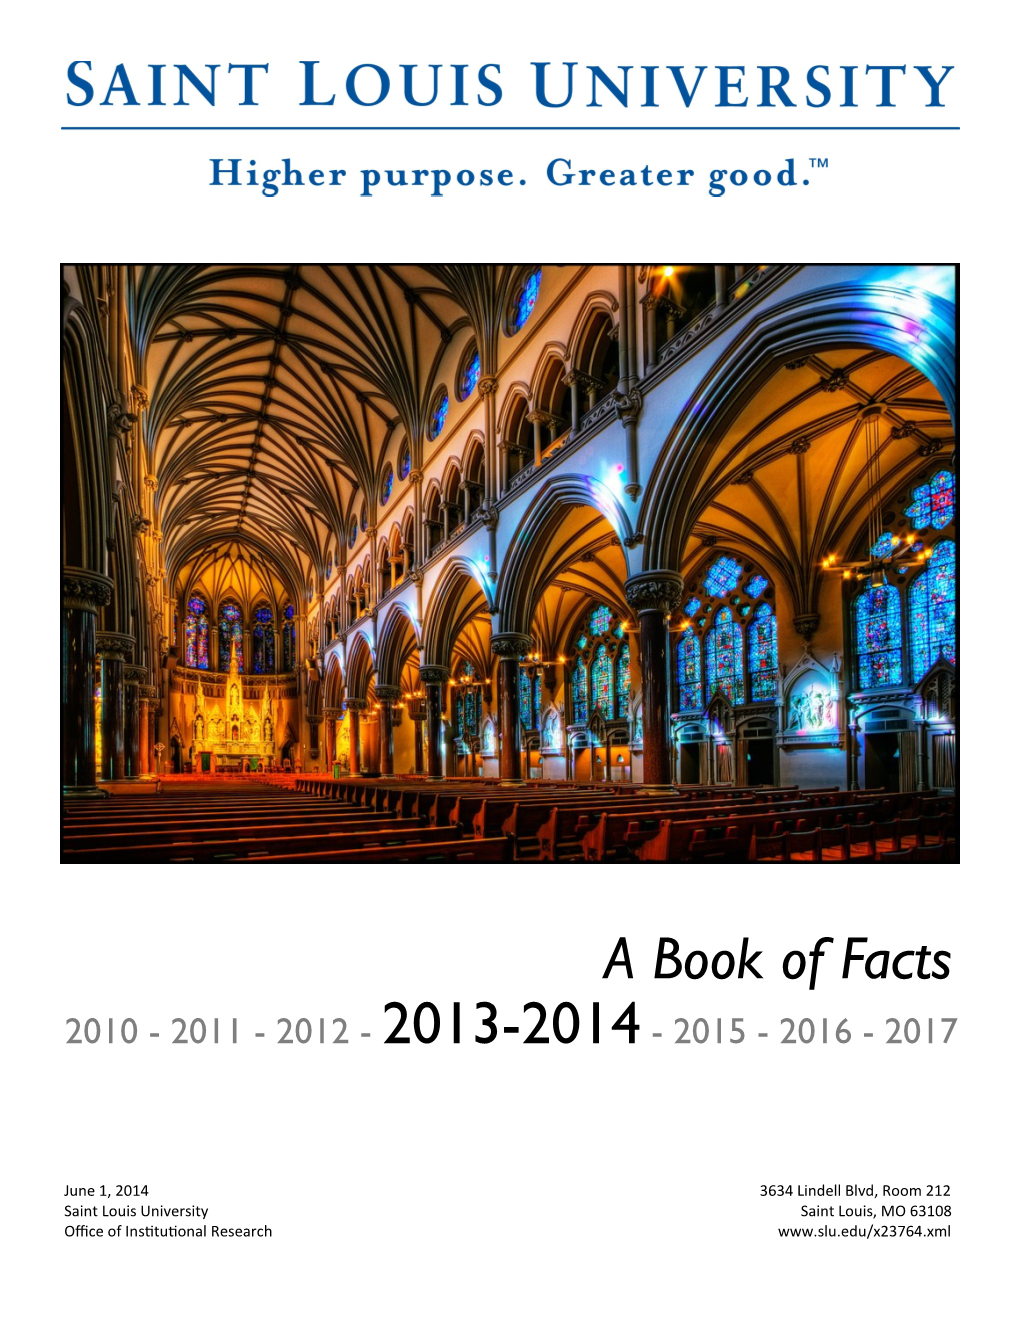 A Book of Facts 2010 - 2011 - 2012 - 2013-2014 - 2015 - 2016 - 2017